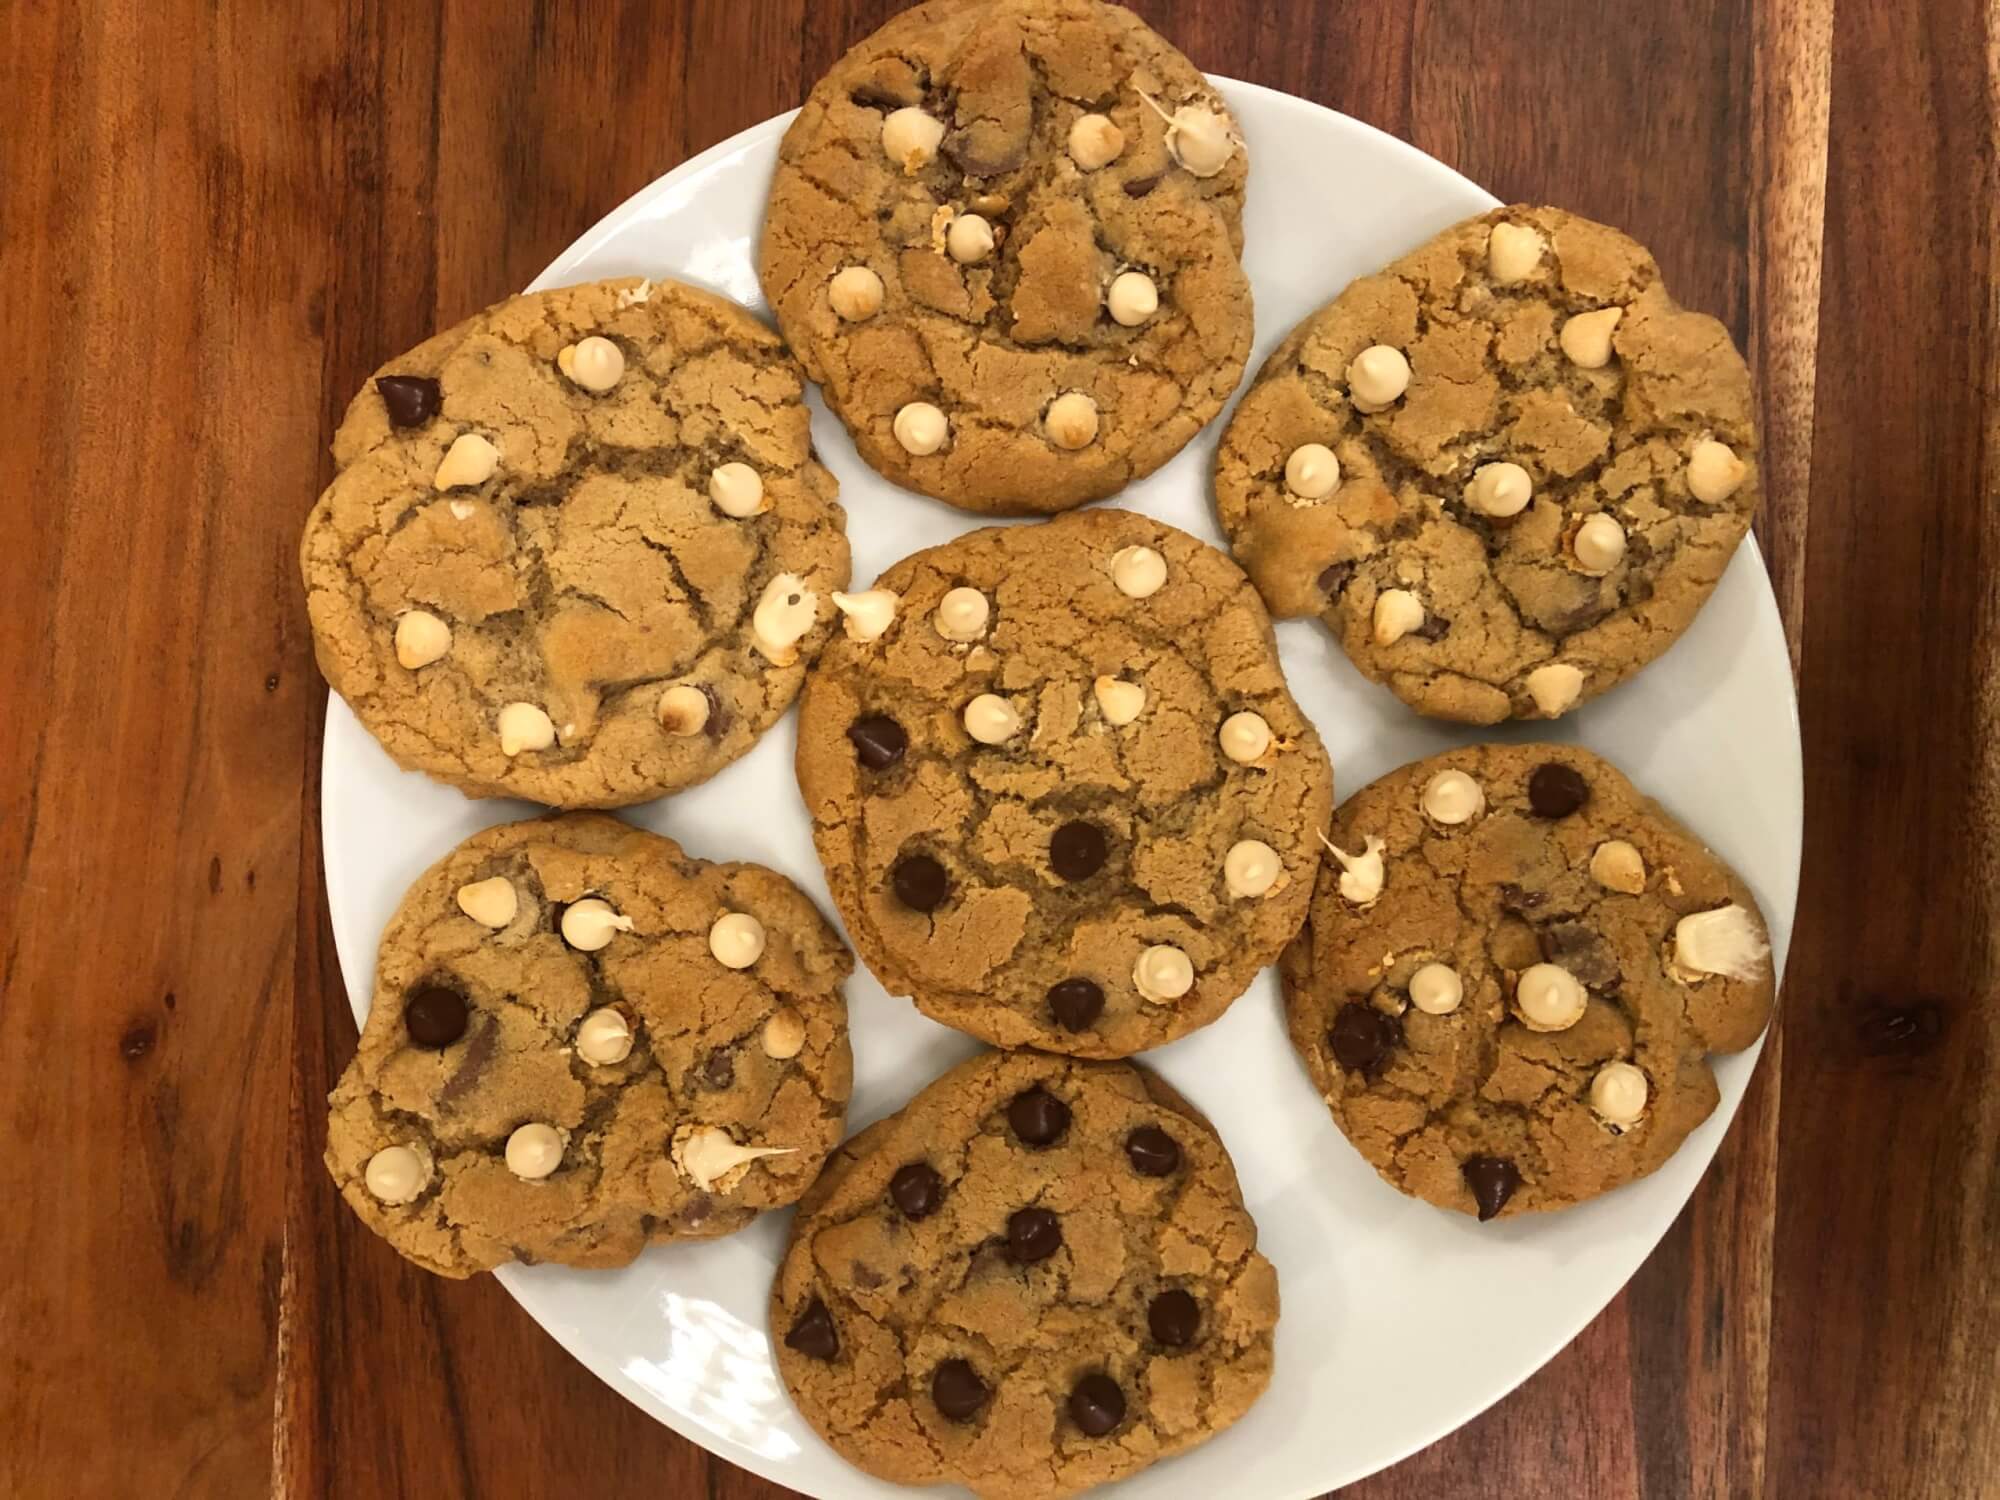 A plate of chocolate chip cookies white and dark chocolate chips; each cookie has variable numbers of white and dark chocolate chips